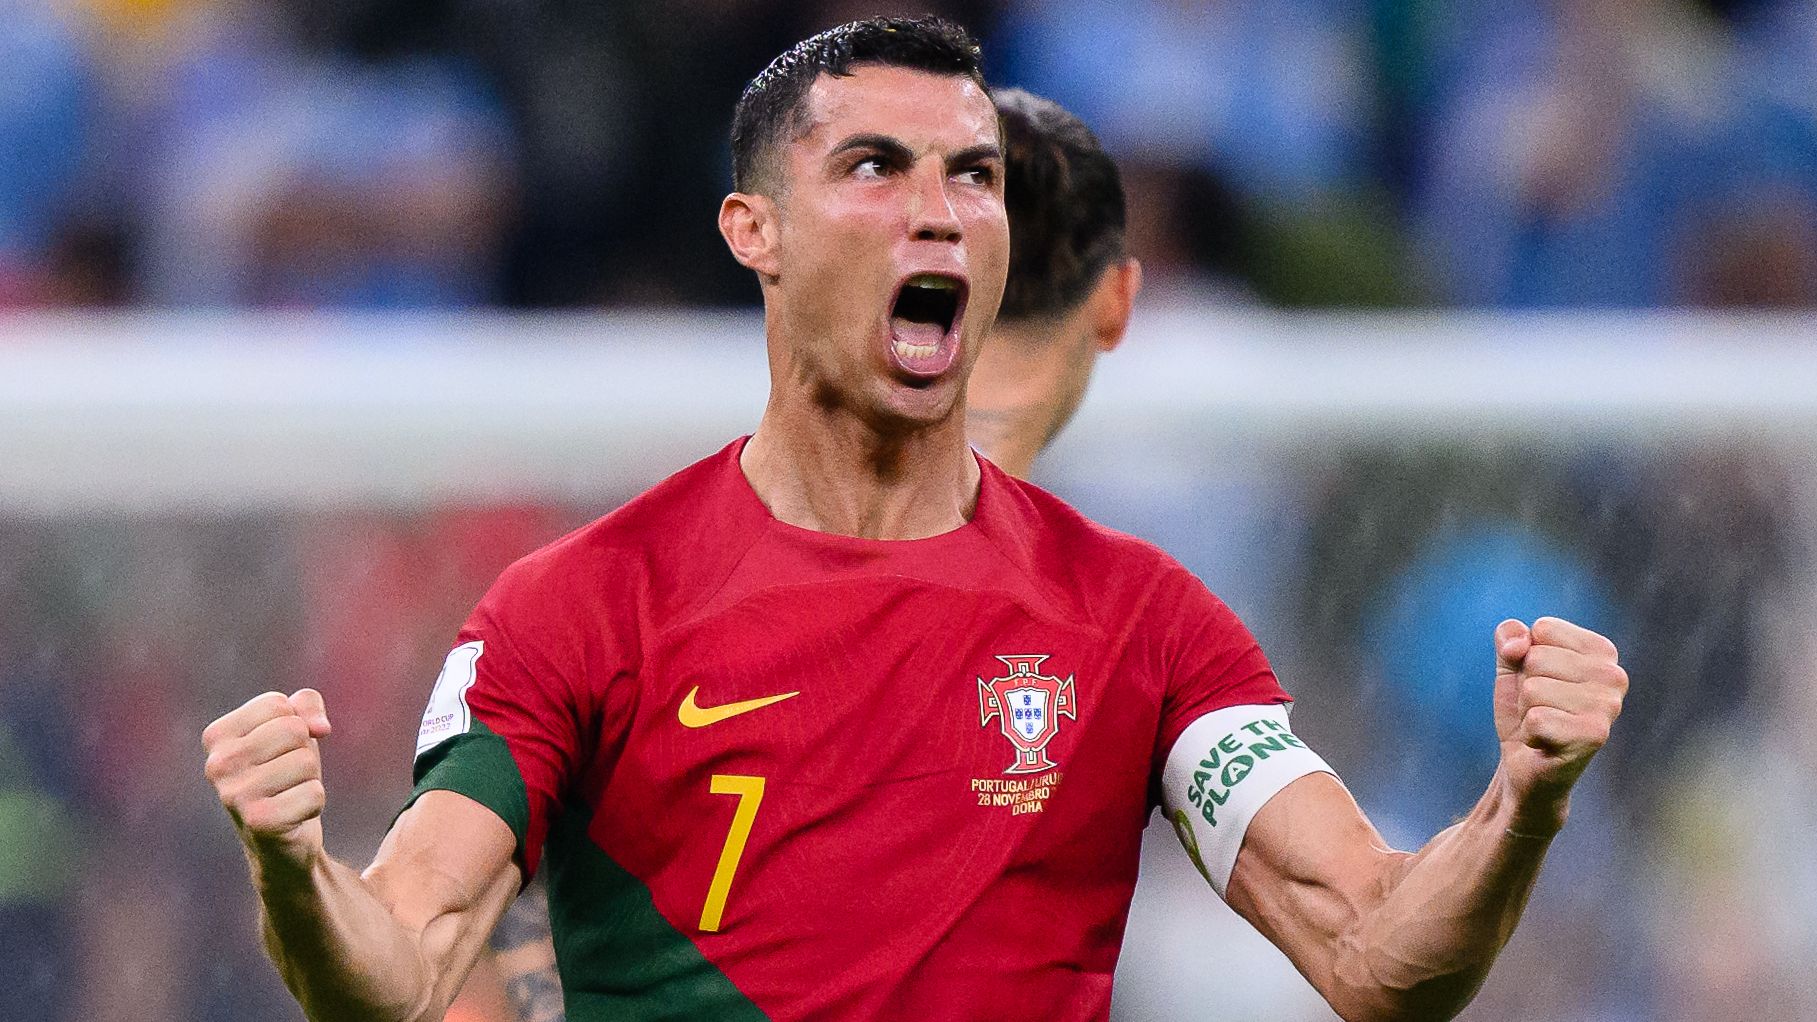 LUSAIL CITY, QATAR - NOVEMBER 28: Cristiano Ronaldo of Portugal celebrates after scoring his team&#x27;s first goal  during the FIFA World Cup Qatar 2022 Group H match between Portugal and Uruguay at Lusail Stadium on November 28, 2022 in Lusail City, Qatar. (Photo by Markus Gilliar - GES Sportfoto/Getty Images)